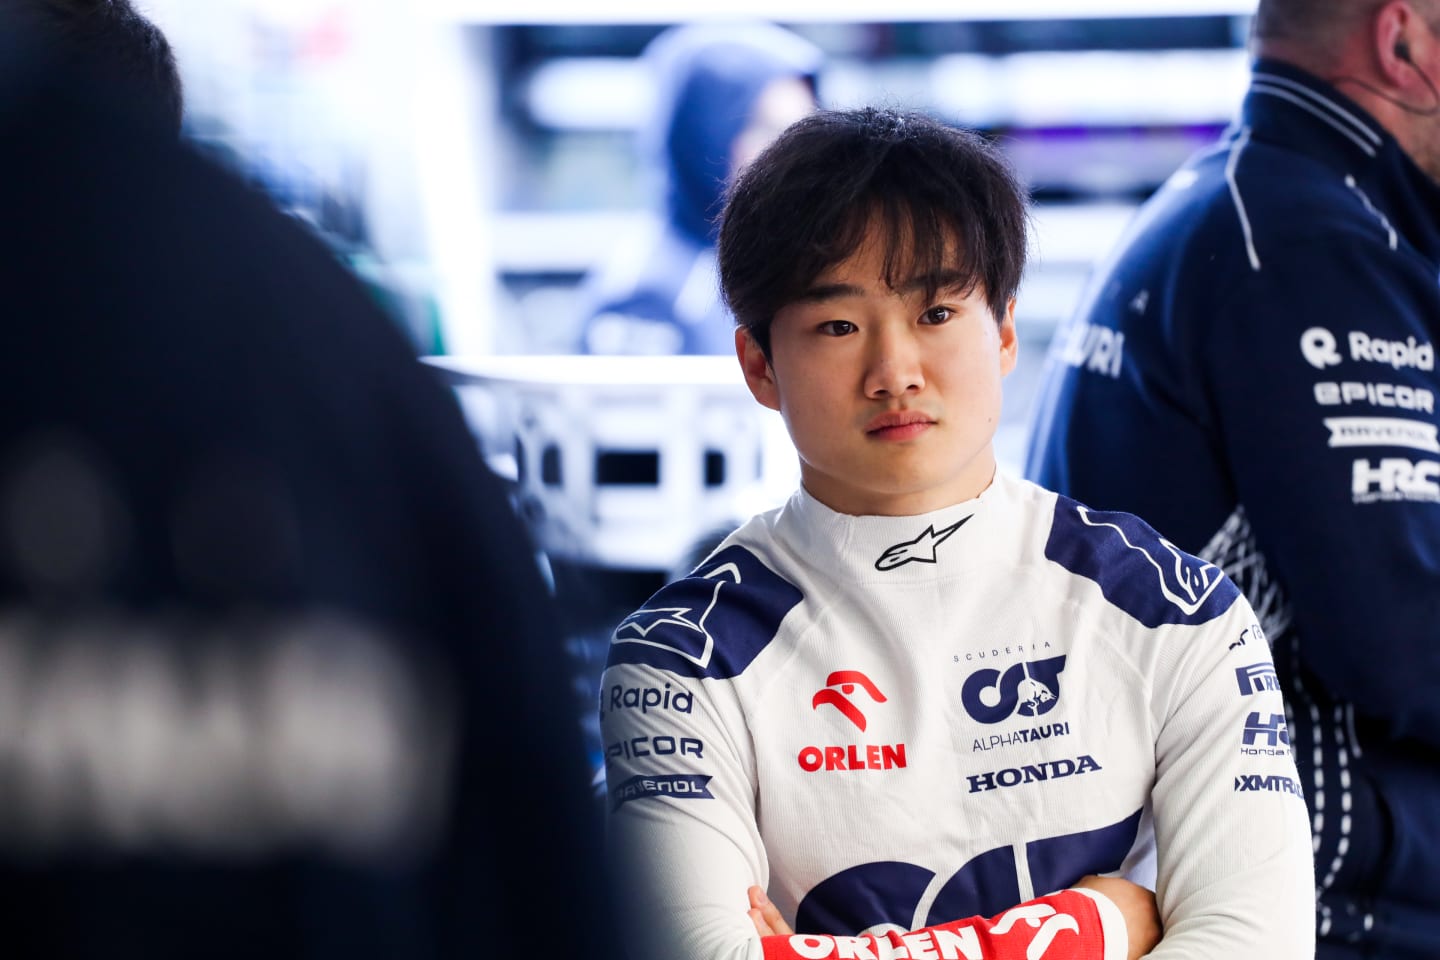 MELBOURNE, AUSTRALIA - APRIL 01: Yuki Tsunoda of Scuderia AlphaTauri and Japan  during qualifying ahead of the F1 Grand Prix of Australia at Albert Park Grand Prix Circuit on April 01, 2023 in Melbourne, Australia. (Photo by Peter Fox/Getty Images)